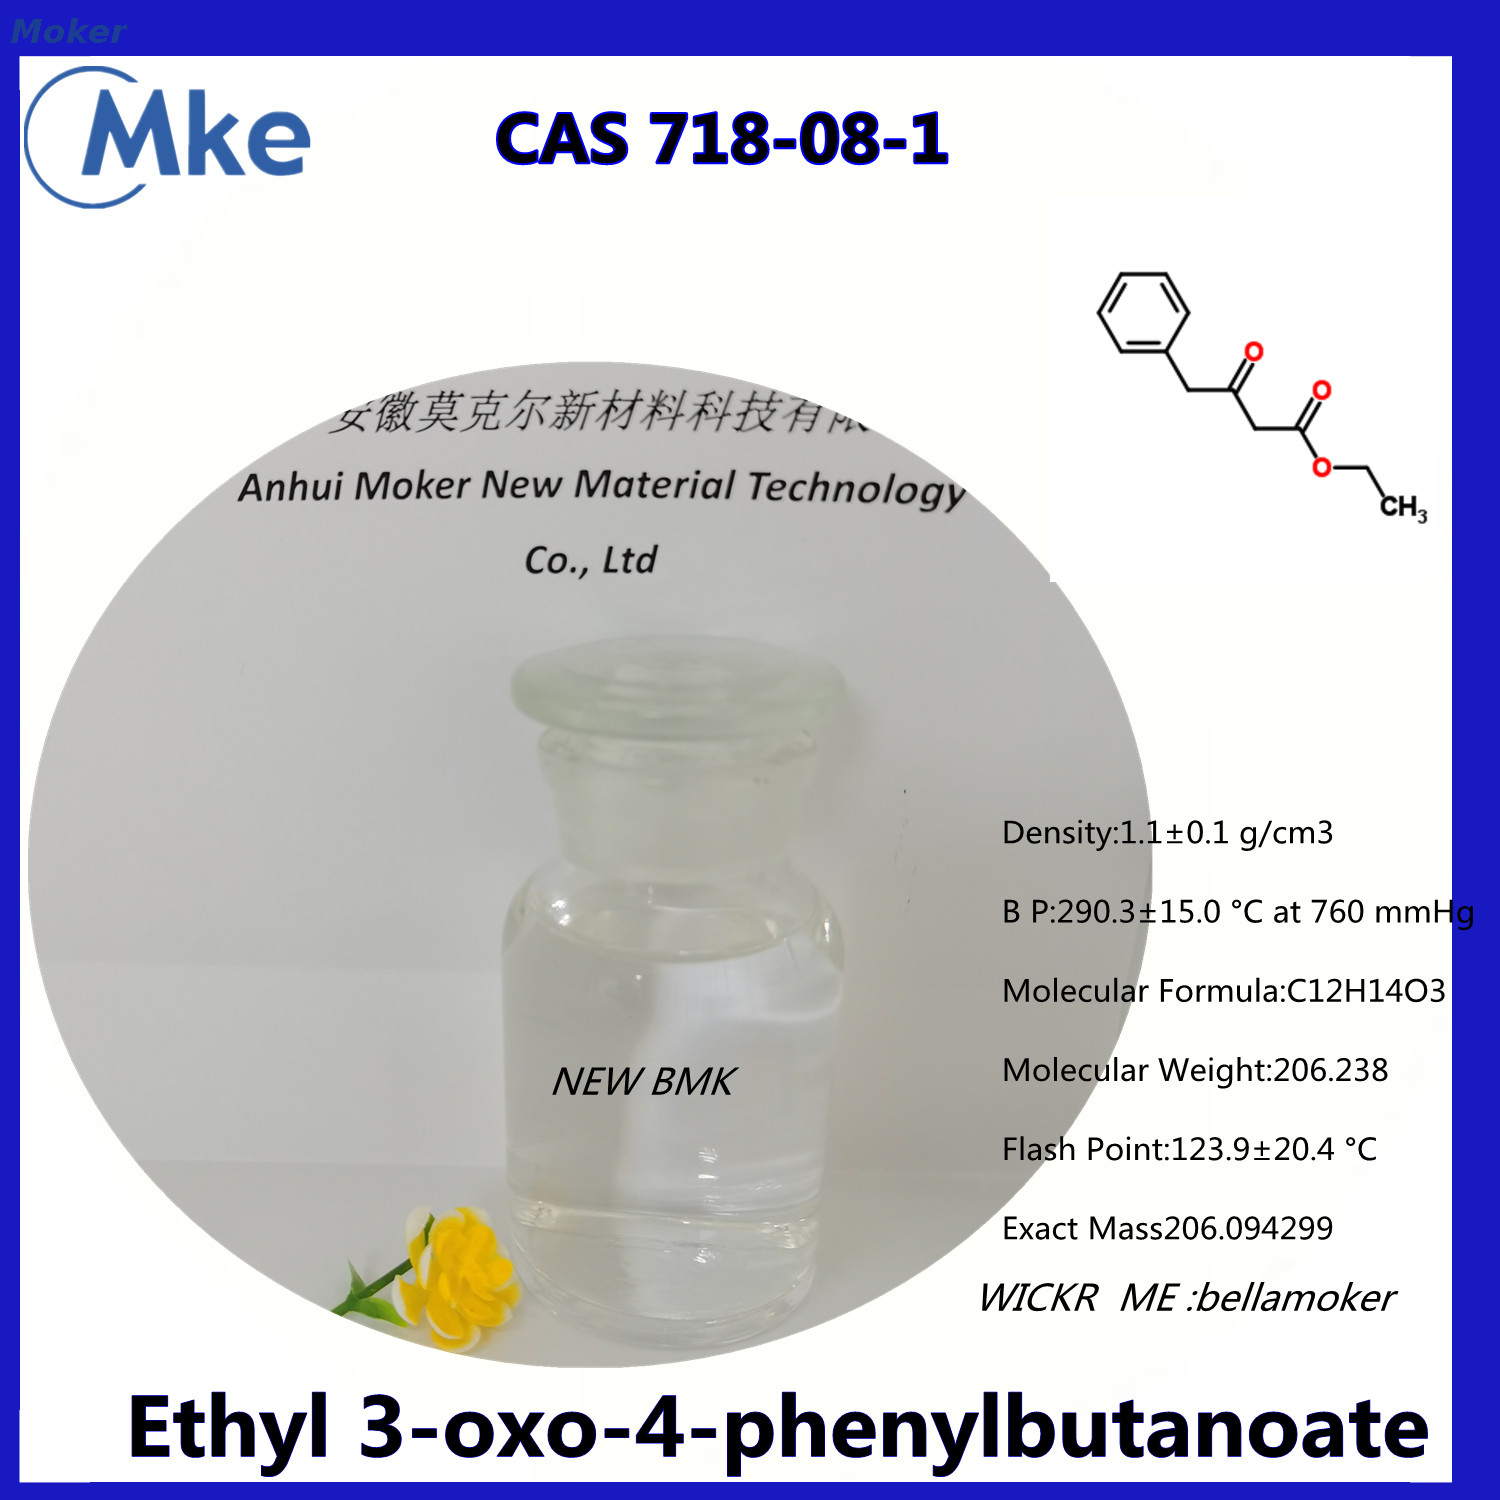 New BMK Glycidate Colorless Oil CAS 718-08-1 New Pmk Oil CAS 28578-16-7 Large Stock 100% Guarantee Delivery